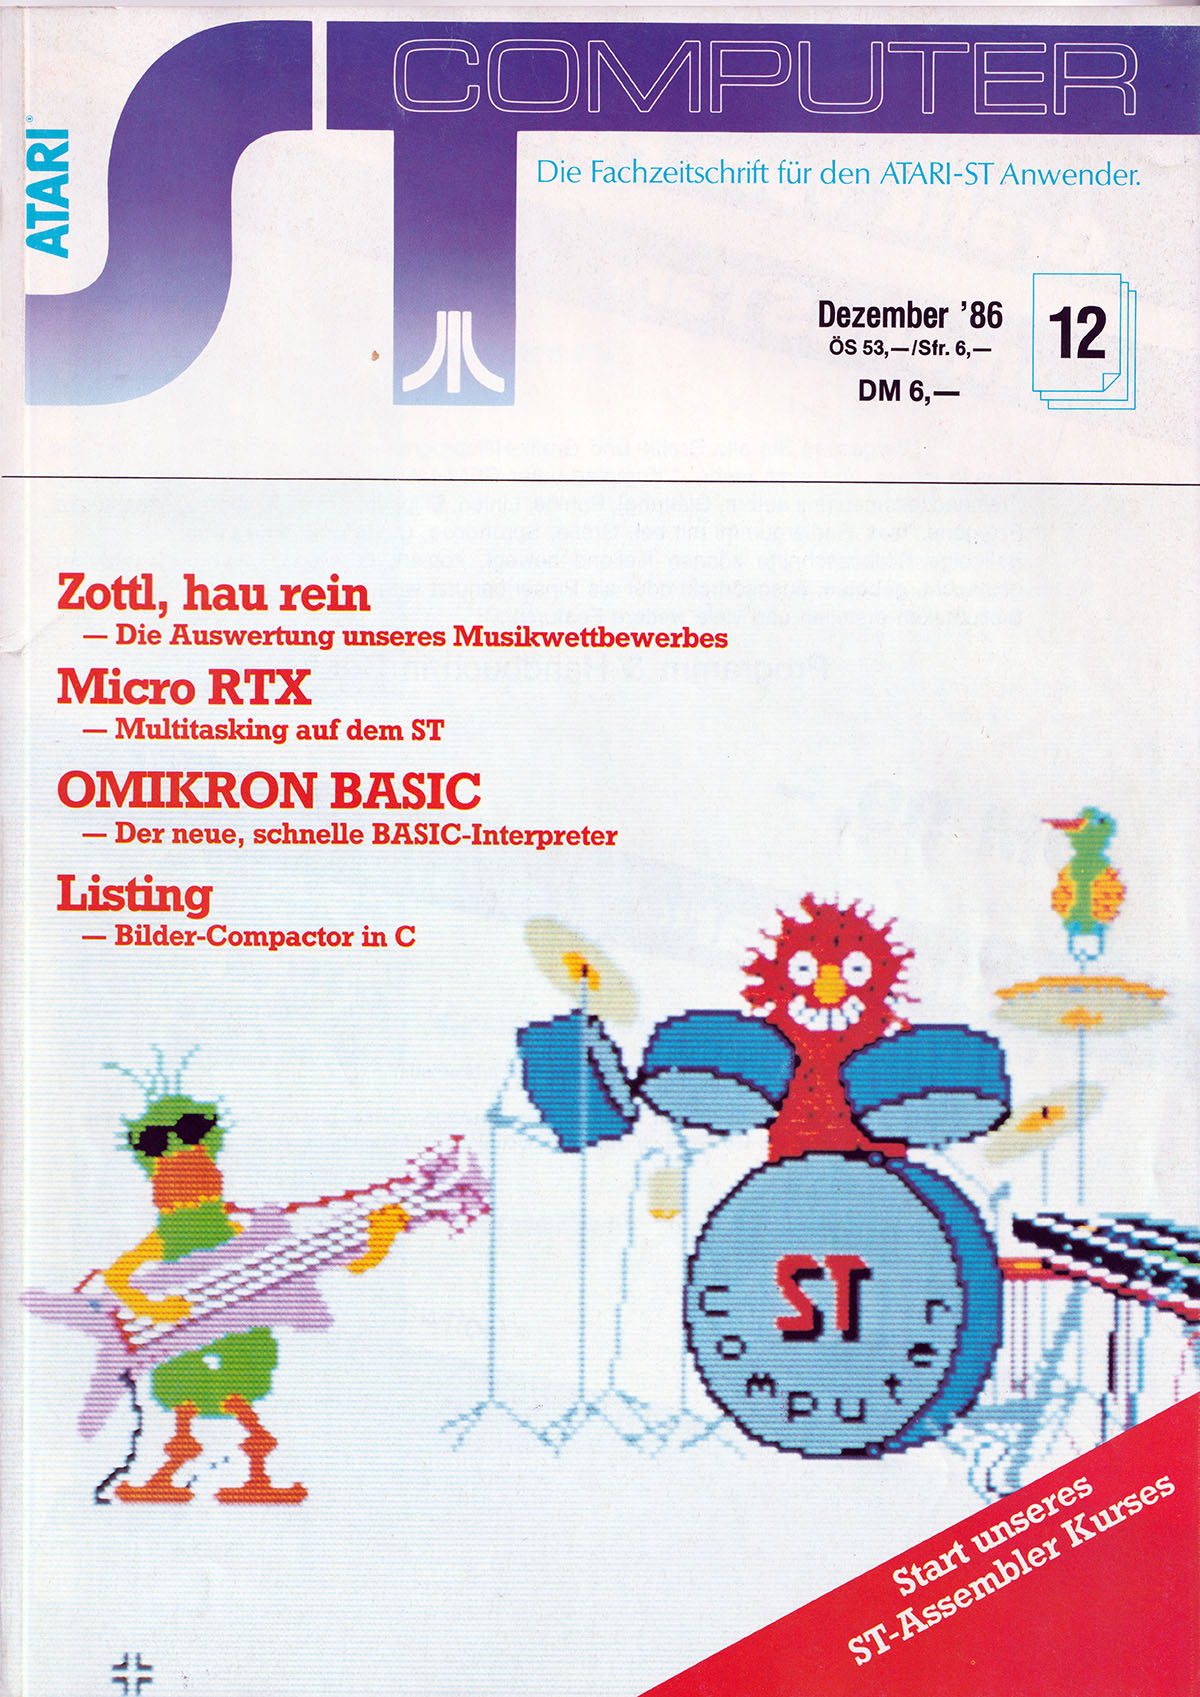 'Grafik un Sound demo' made it to the cover of the December 1986 edition of ST Computer Magazin.